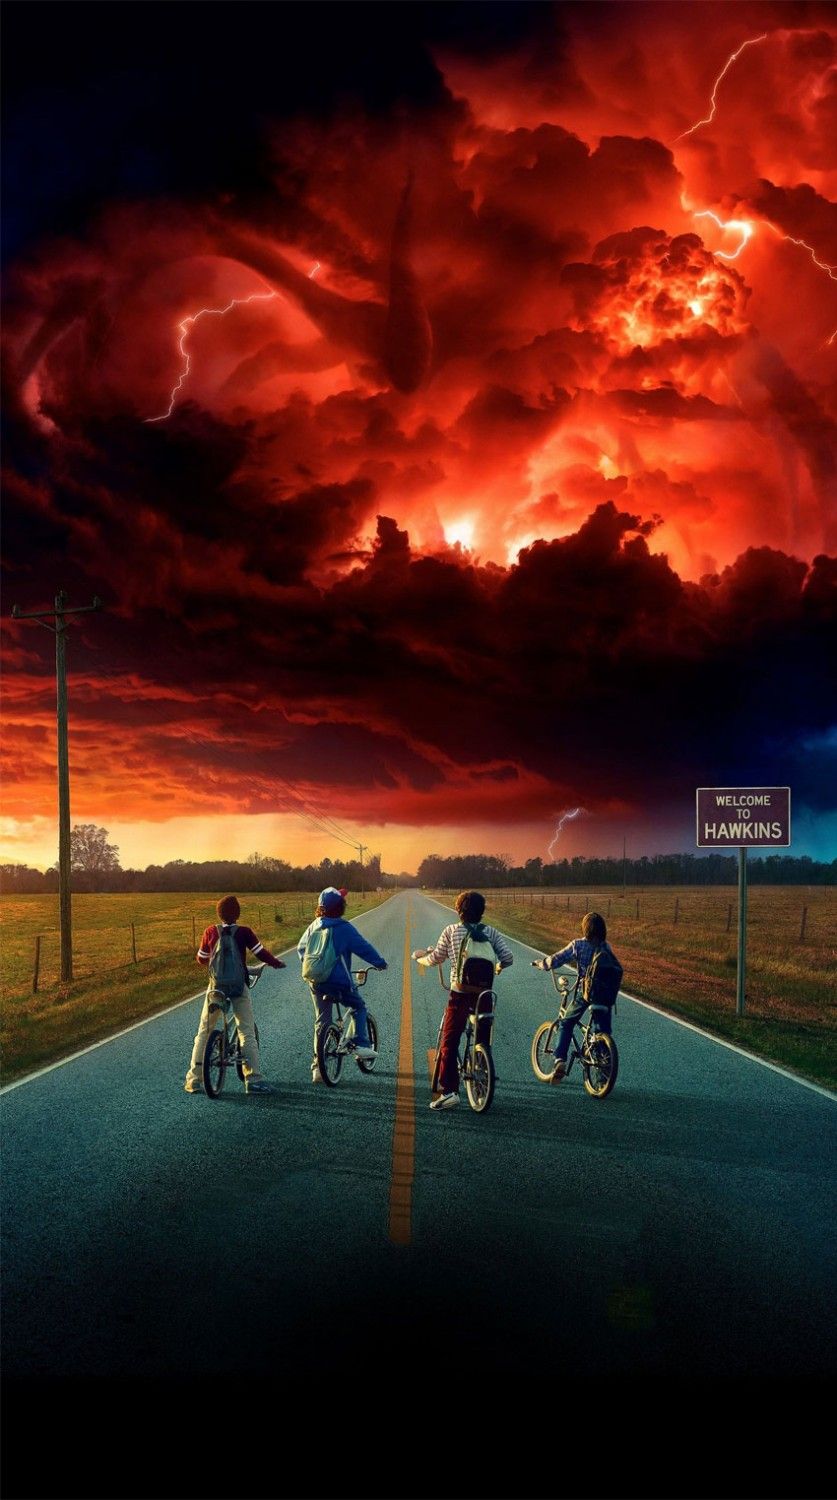 Stranger Things Wallpaper Ideas : Welcome to Hawkins Wallpaper